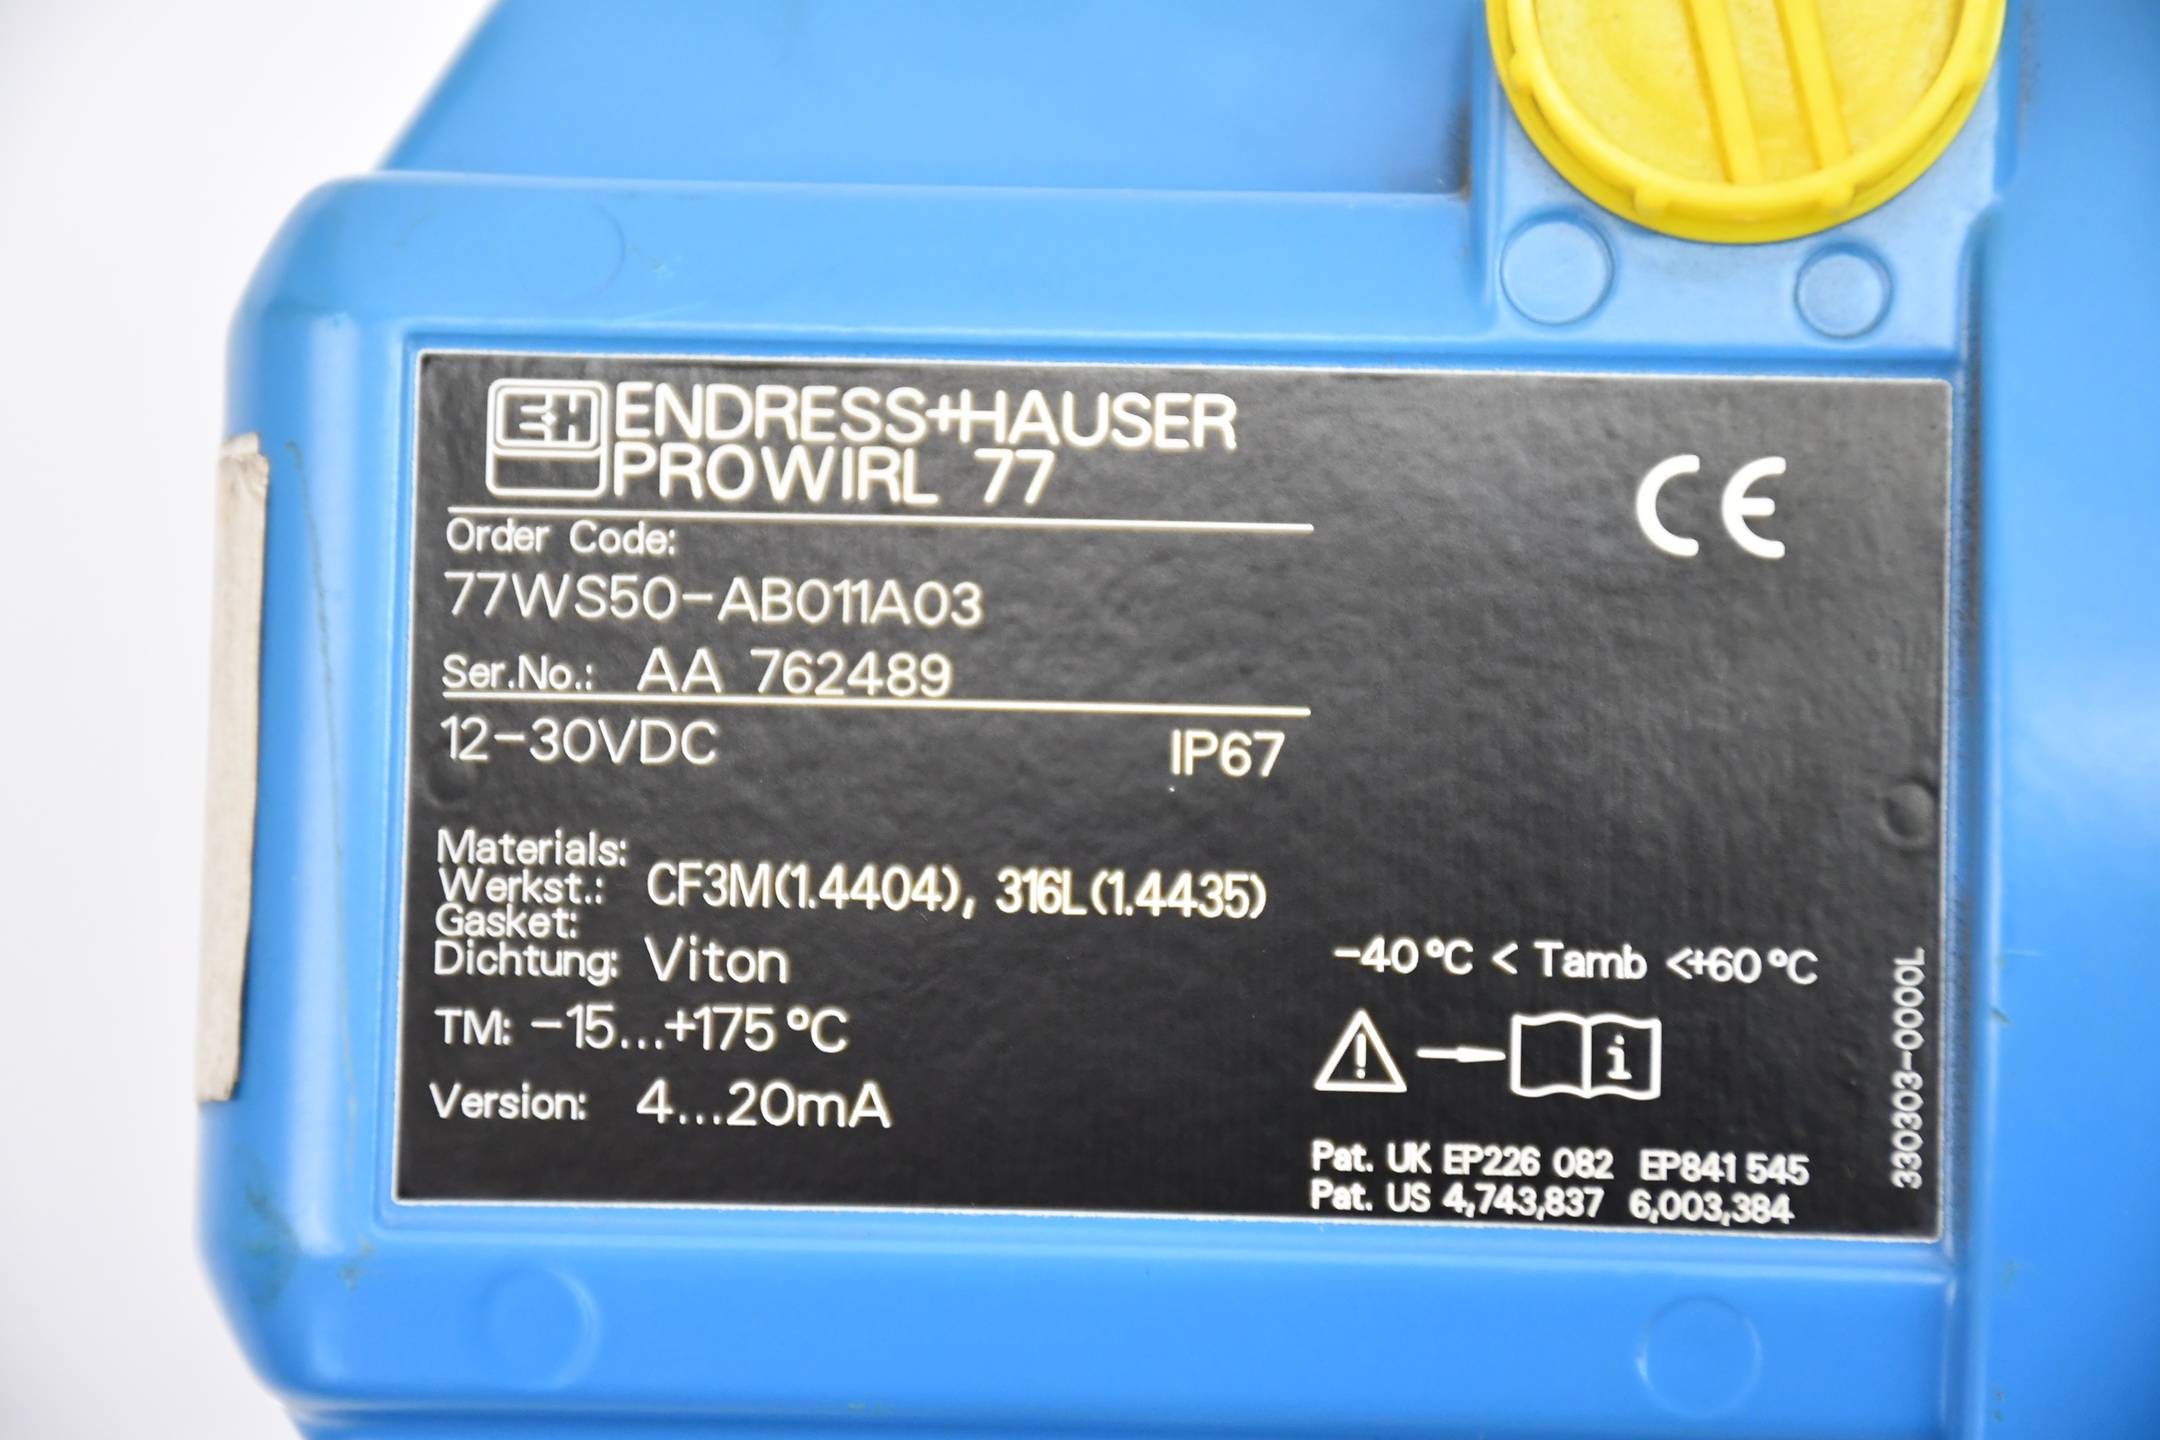 ENDRESS+HAUSER PROWIRL 77 77WS50-AB011A03